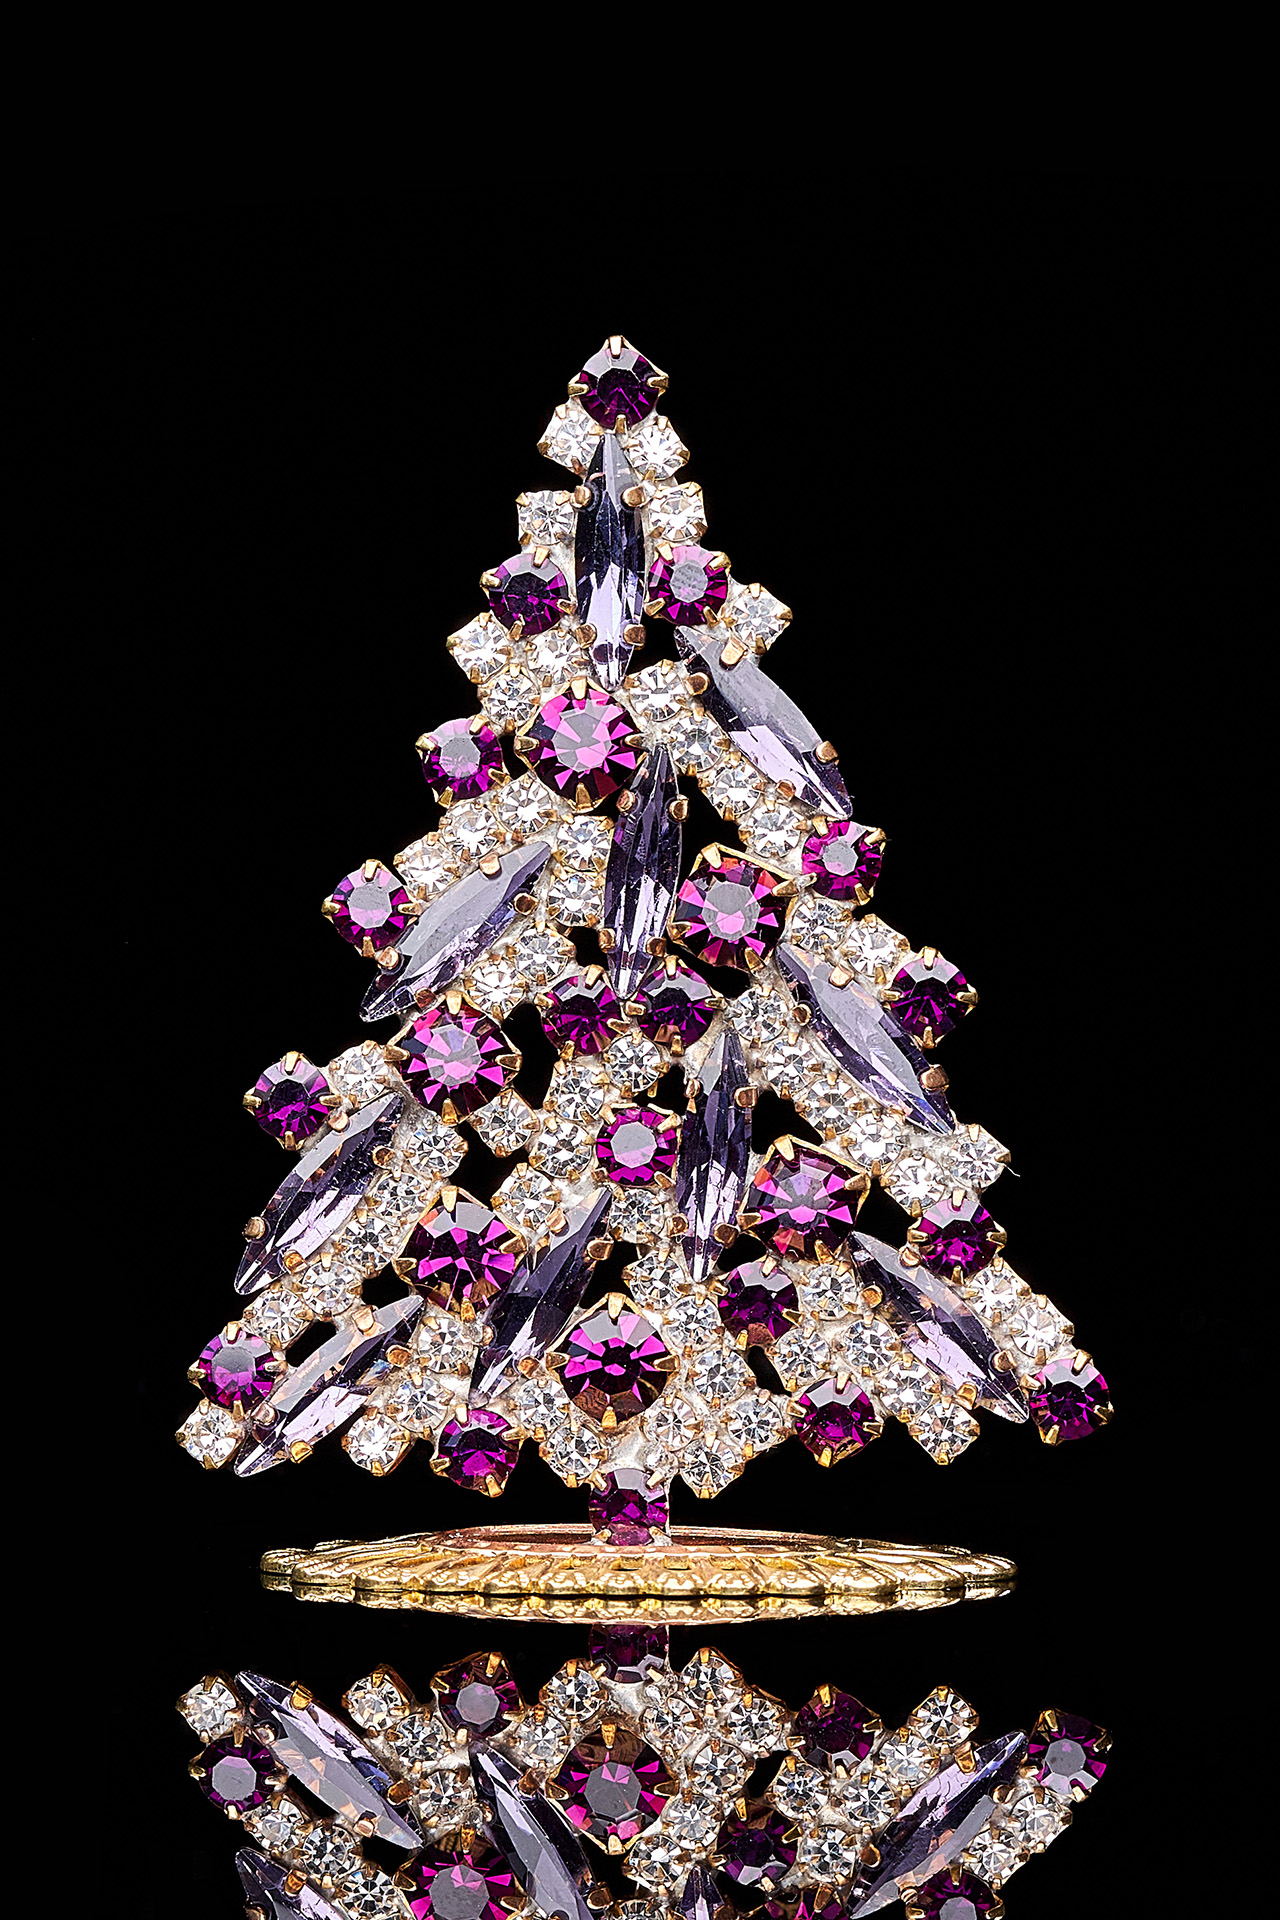 Magical tabletop Christmas tree handcrafted with purple rhinestones